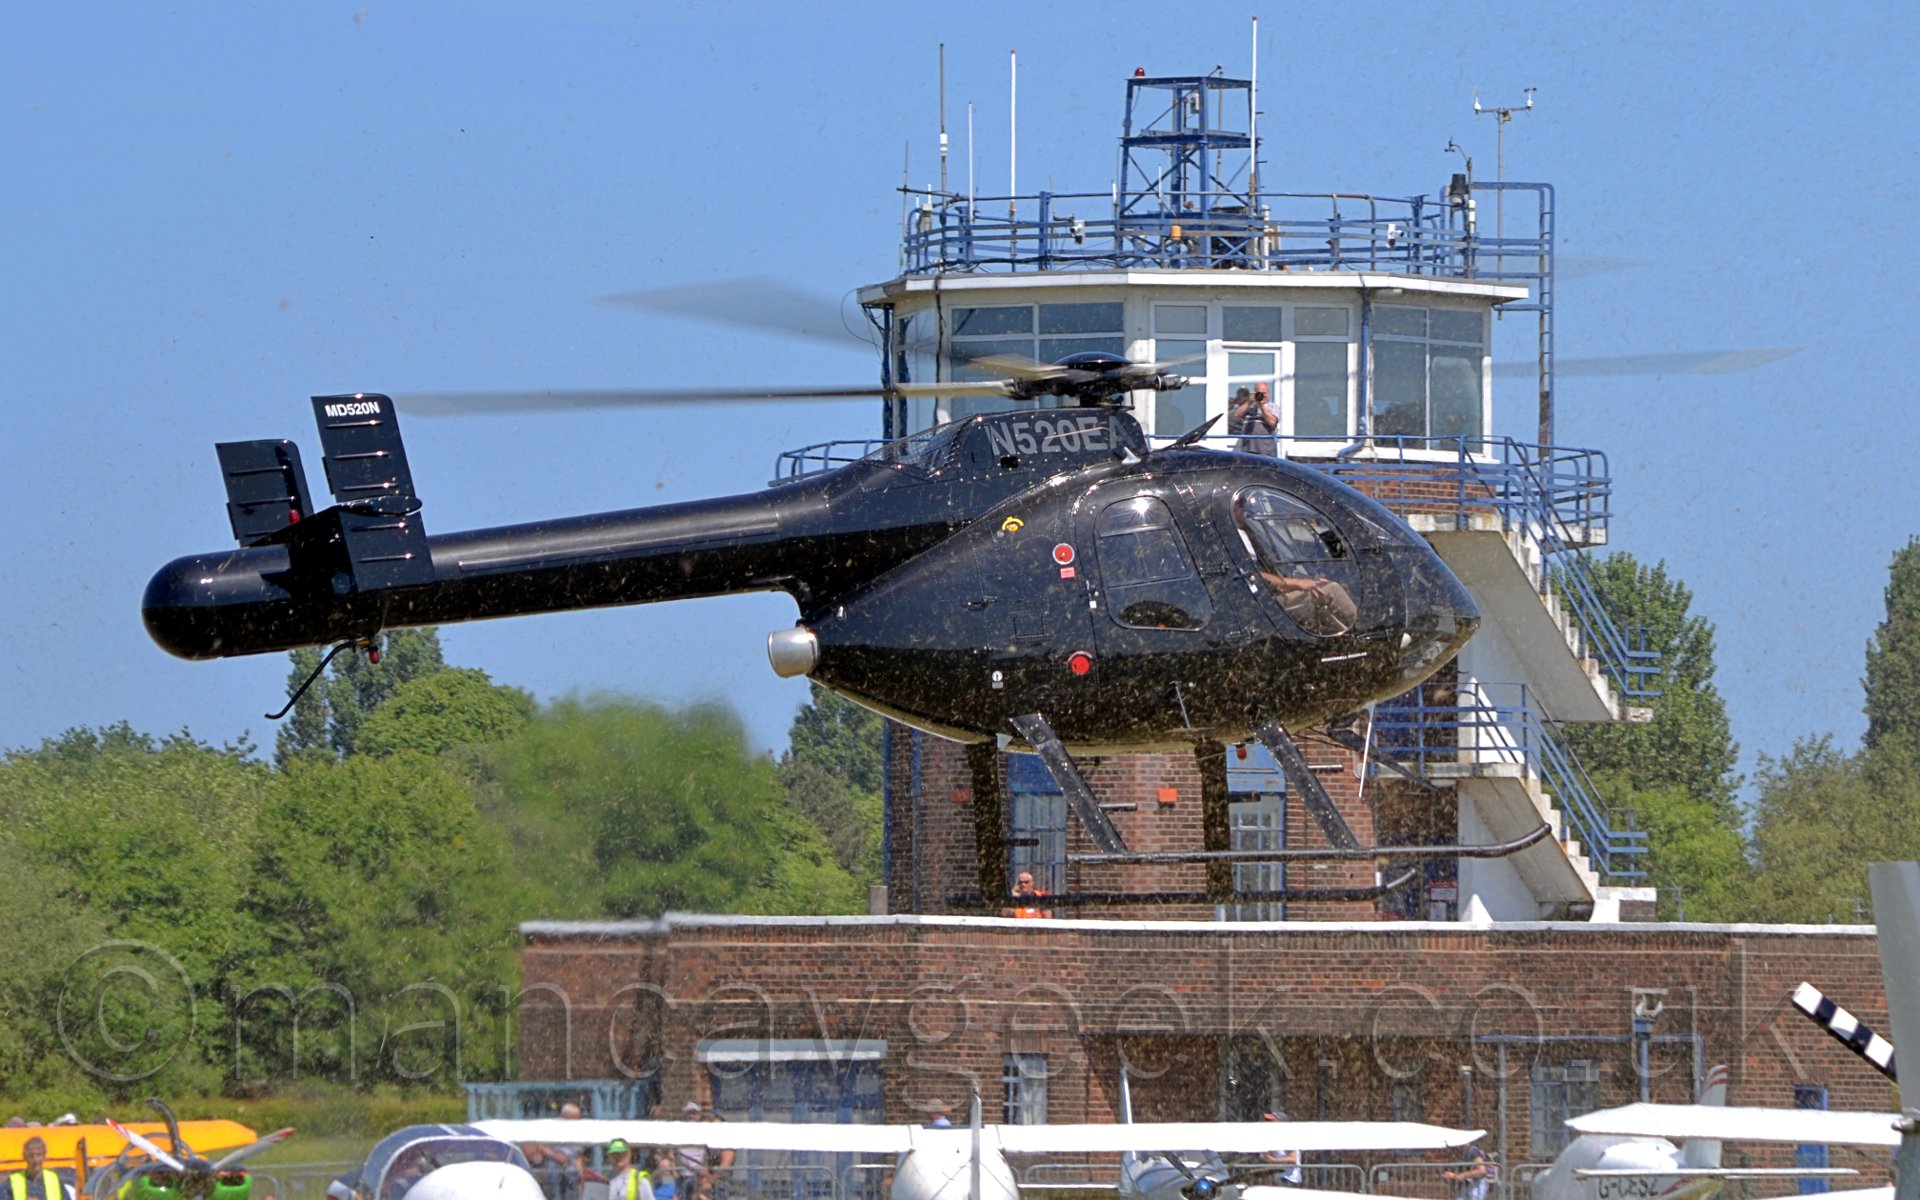 Side view of a helicopter hovering several feet above the ground, facing to the right. The helicopter is completely black, with the registration "N520EA" on the engine on top of the fuselage. In the background is a brown building with a fully glazed room occupying the whole top floor, with several antennae on top. A man is standing on a blacony taking a photo of this helicopter, but looks as if he is taking a photo of me and my camera.